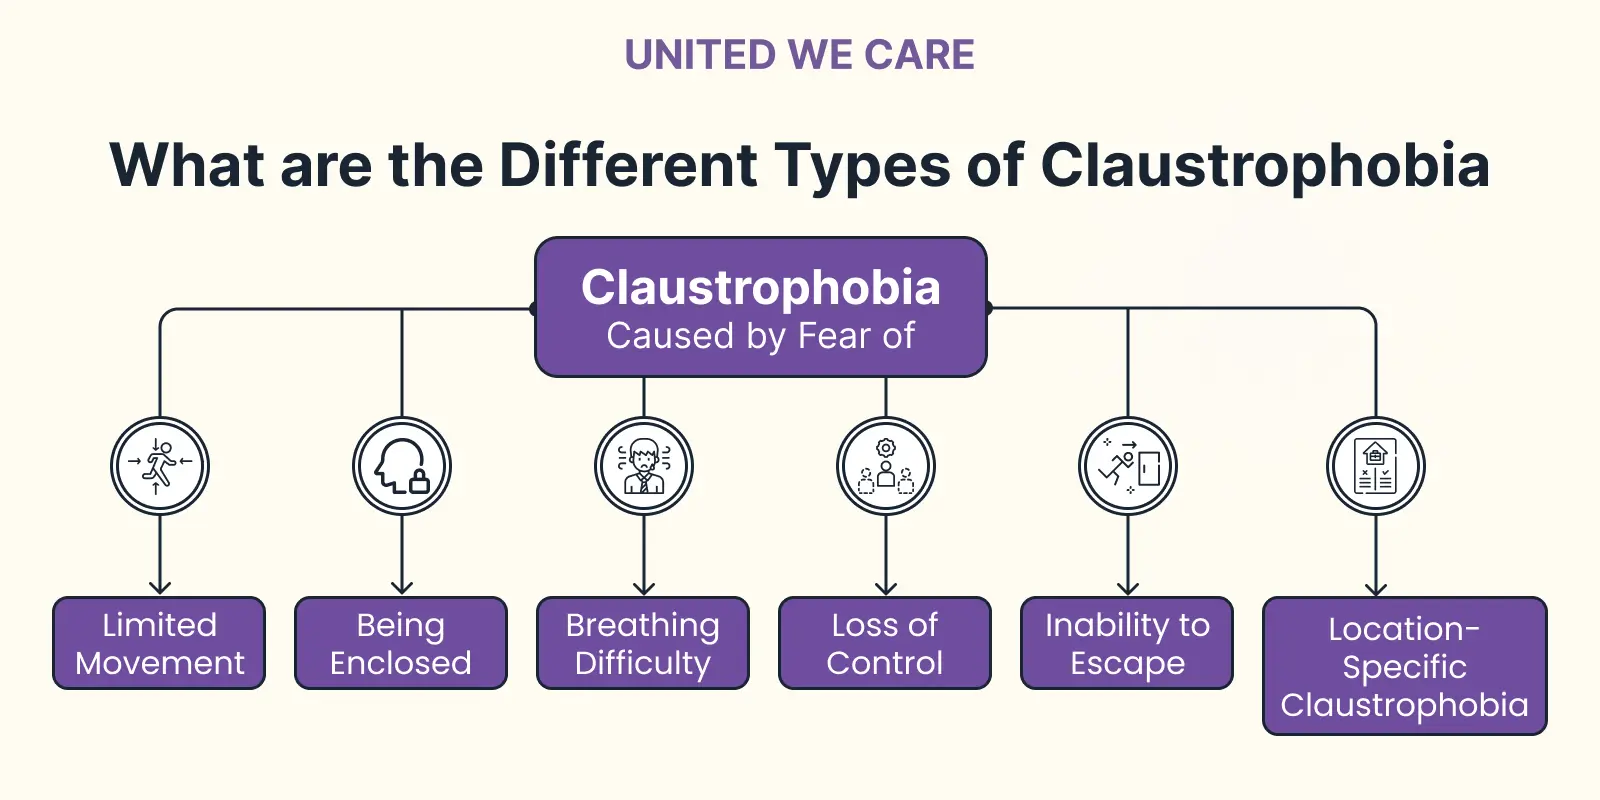 What are the Different Types of Claustrophobia? 